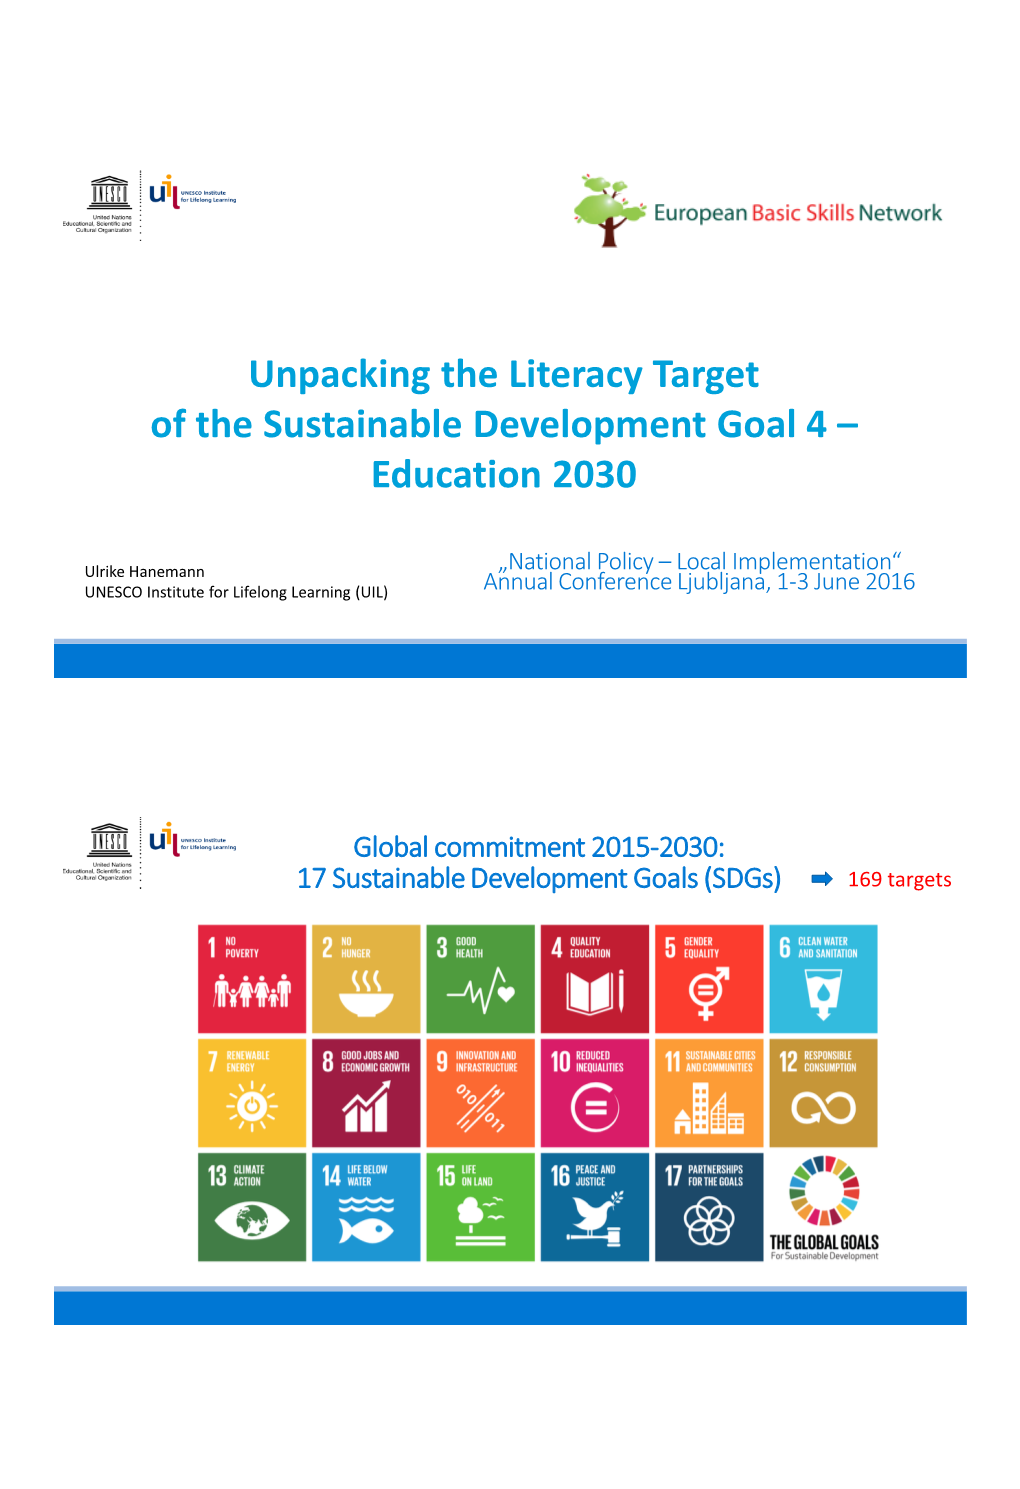 Unpacking the Literacy Target of the Sustainable Development Goal 4 – Education 2030